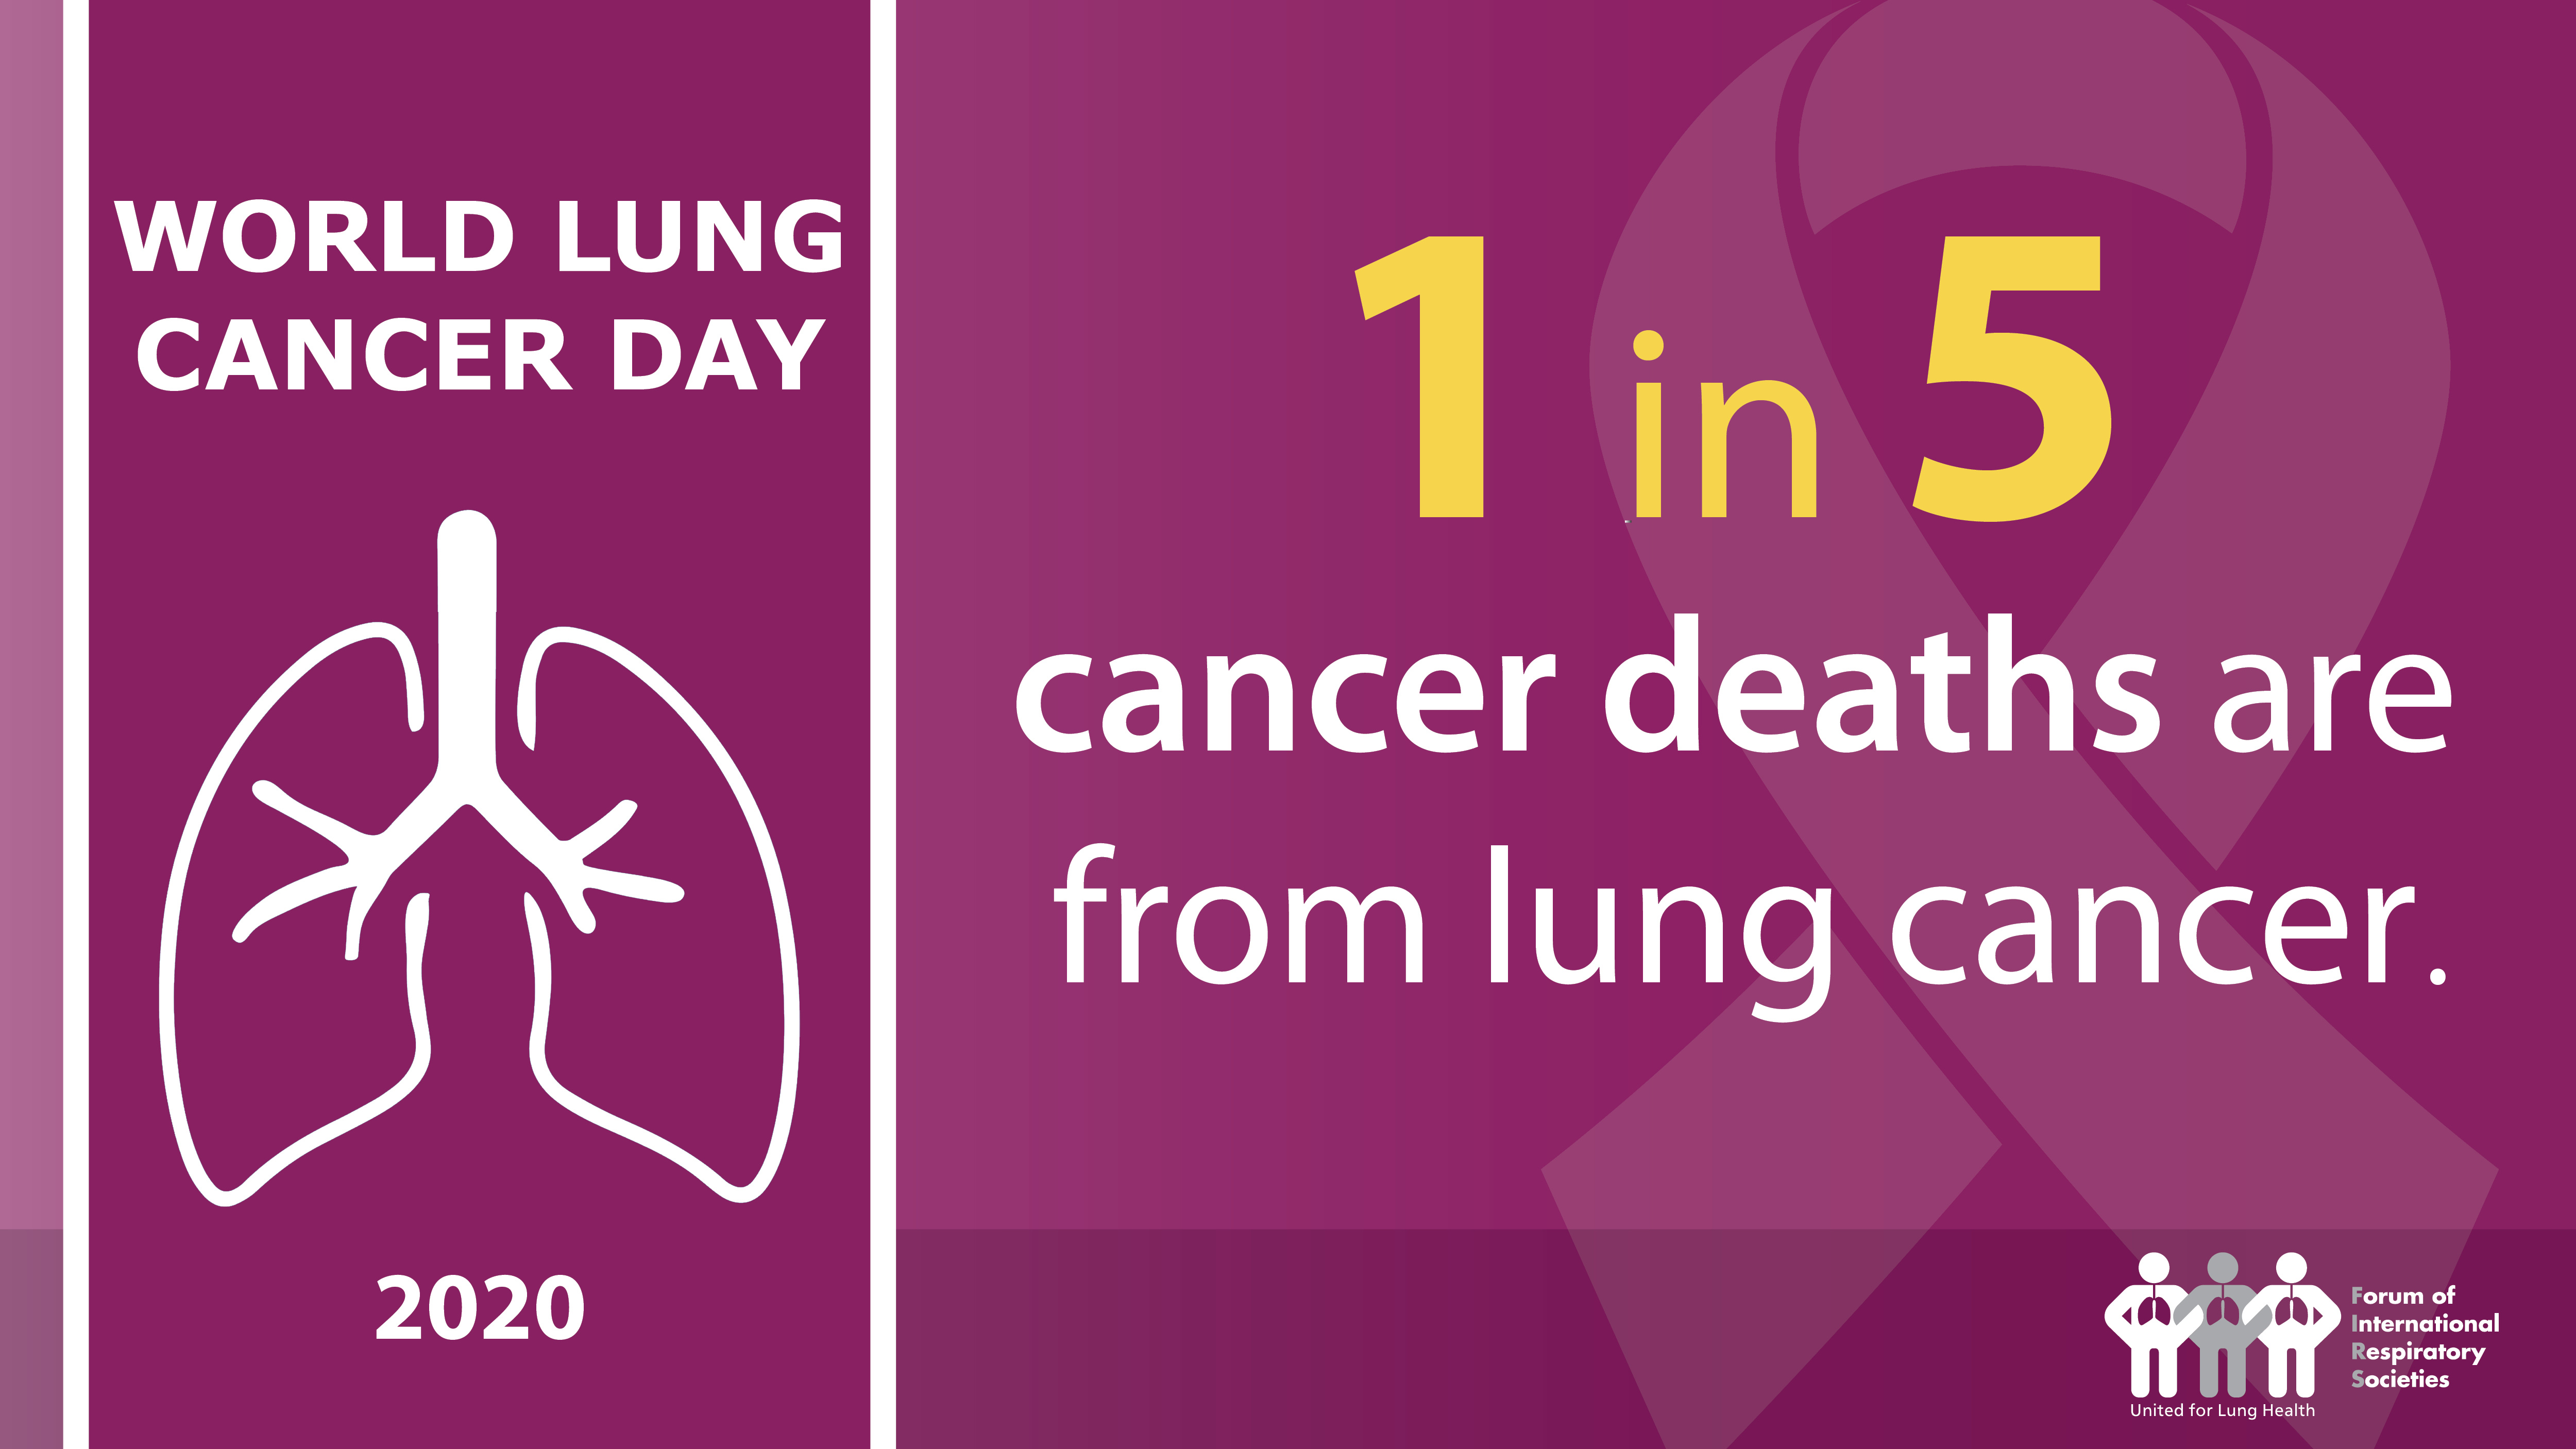 World Lung Cancer Day 2020 Respiratory groups stress lung cancer risks